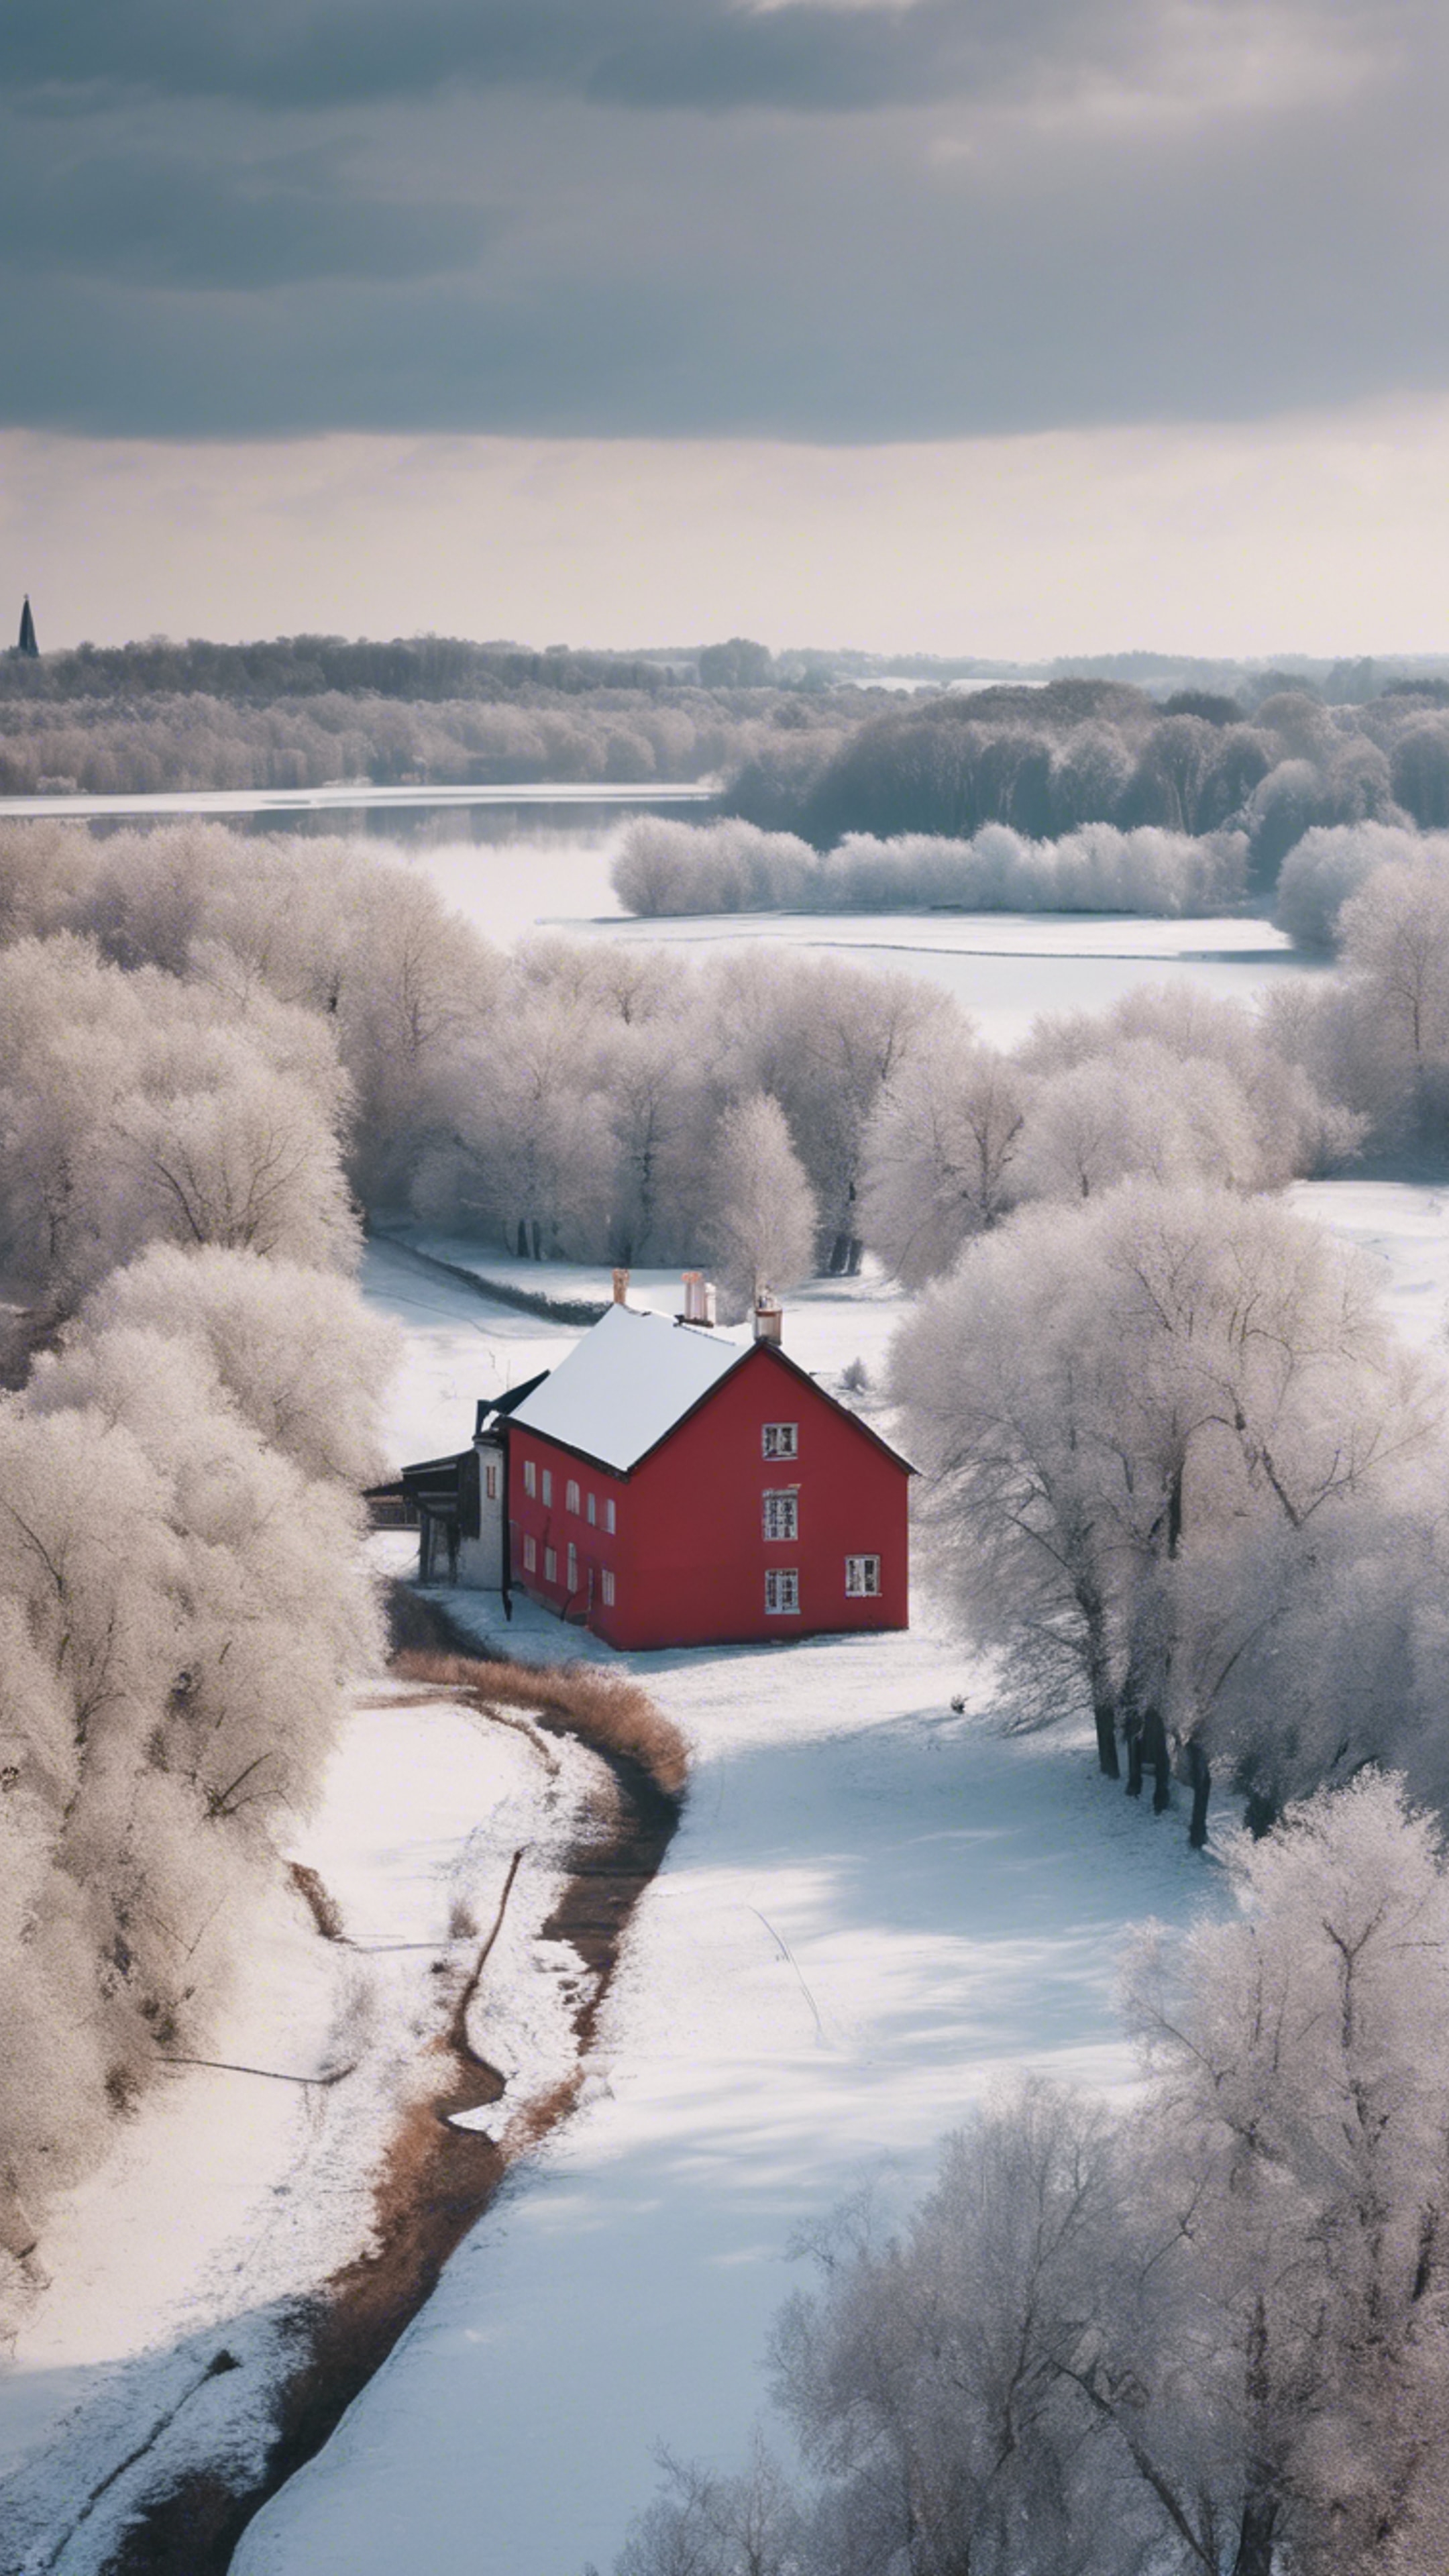 A snow-covered French country landscape with bare trees, a frozen river, and a small red-roofed house in the distance. Tapet[86a496d4055745a5962e]